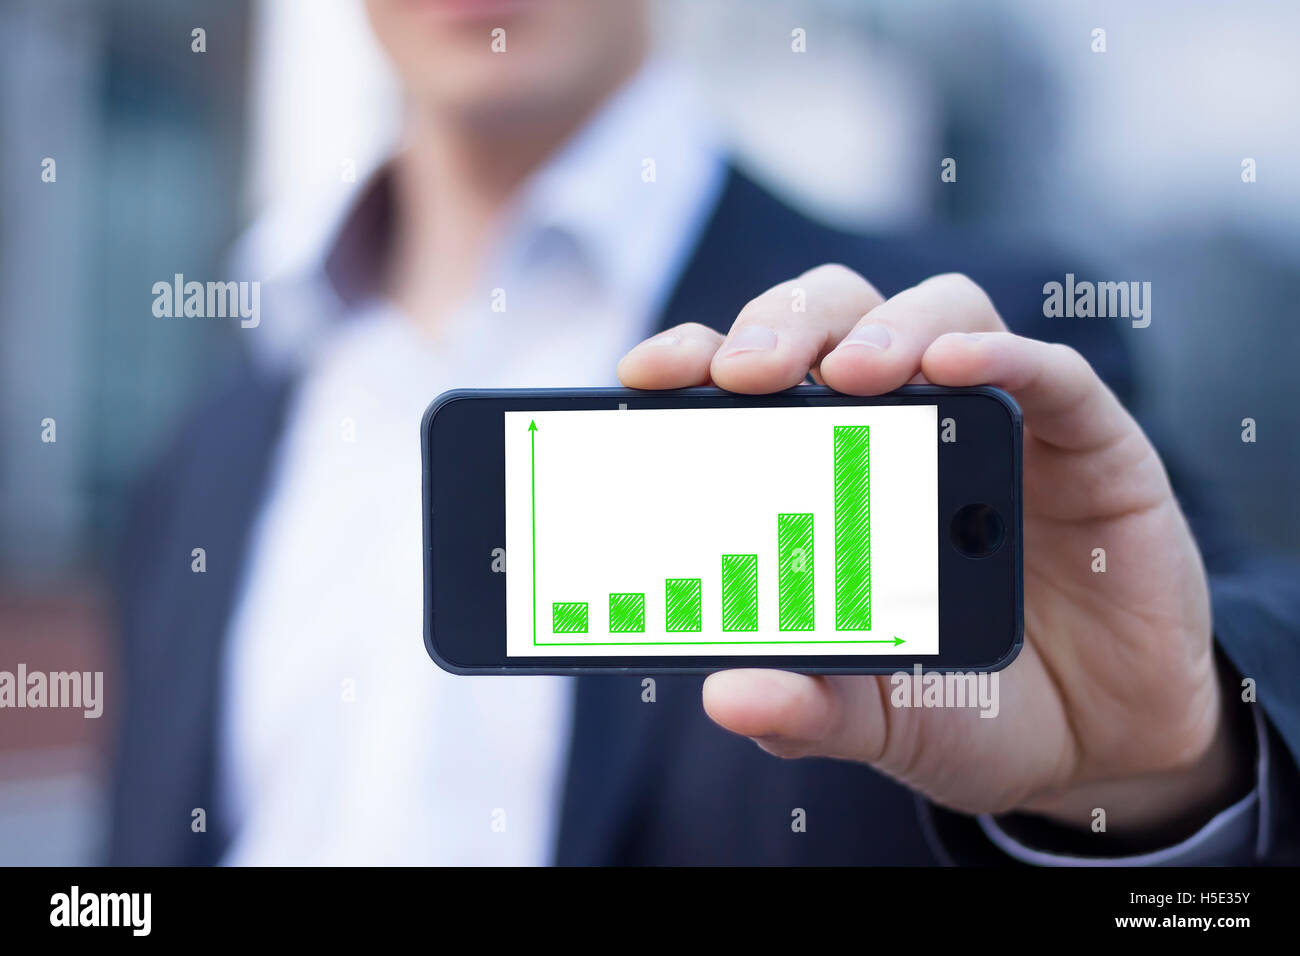 Businessman showing smartphone screen with sustainable development results on green bar chart Stock Photo